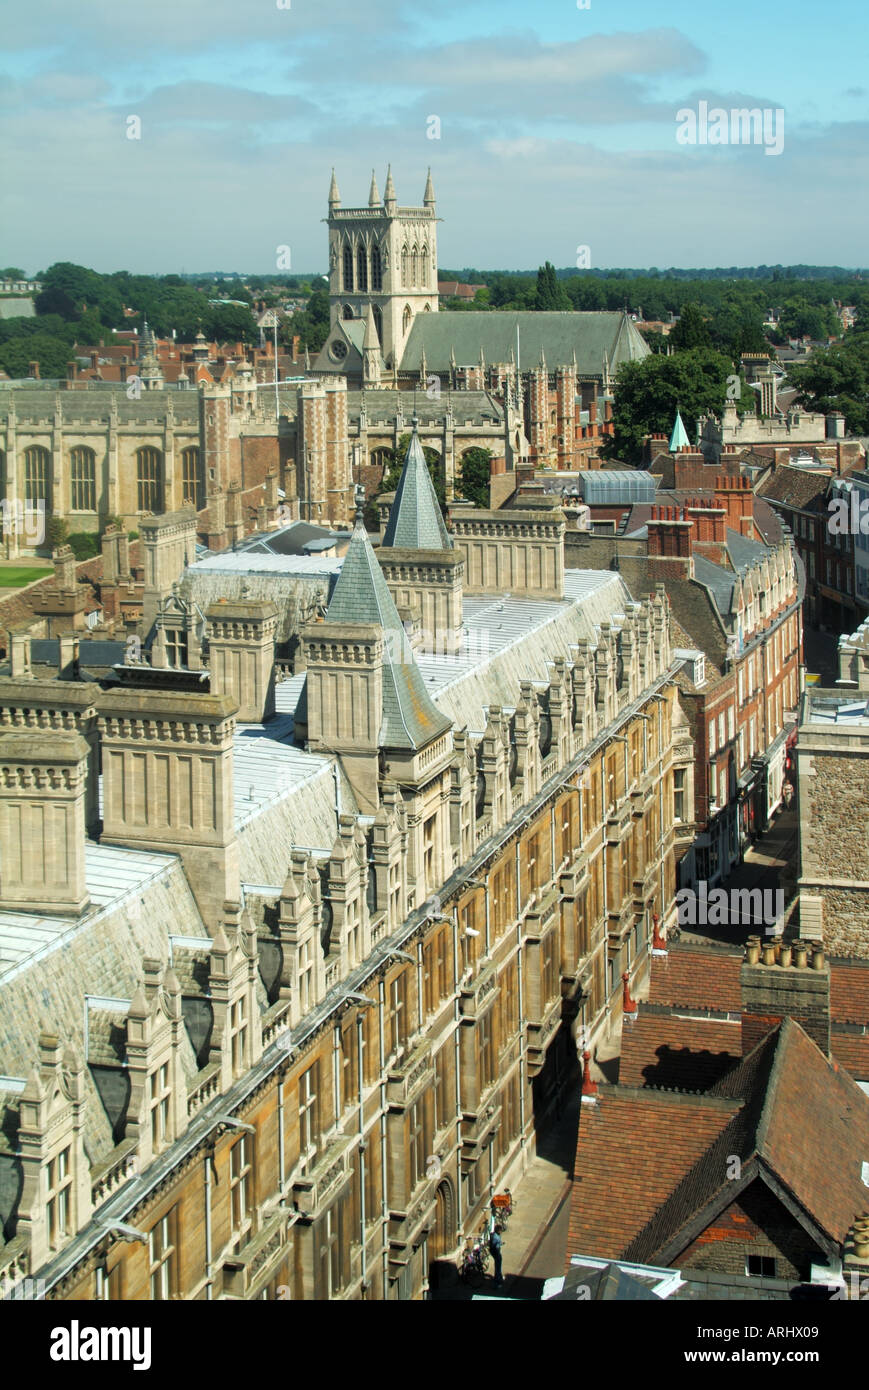 Cambridge university town college rooftops spires and church towers Stock Photo